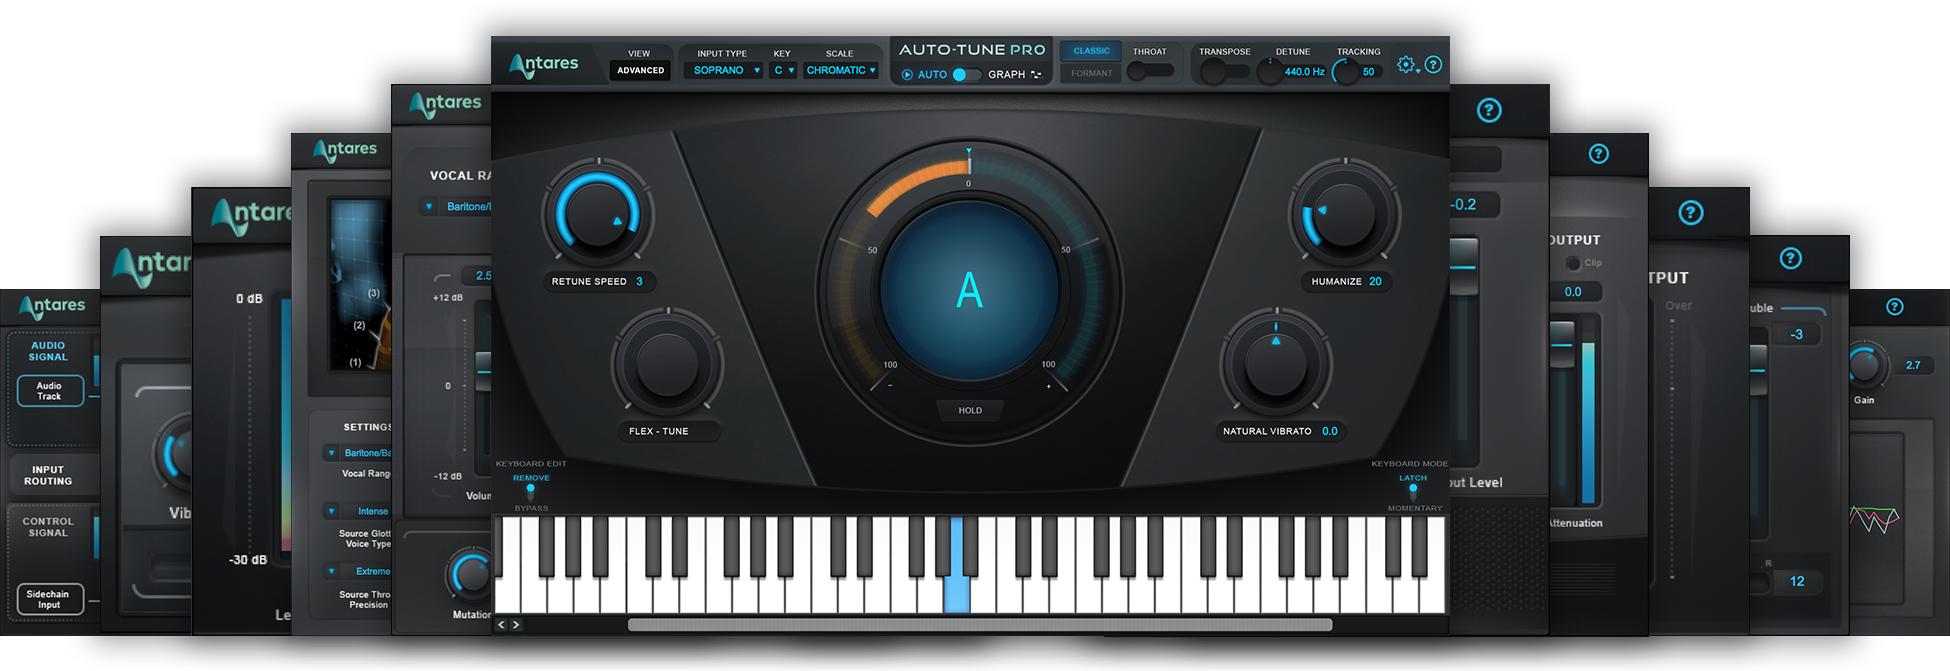 Antares | Auto-Tune Unlimited - 1-year Subscription